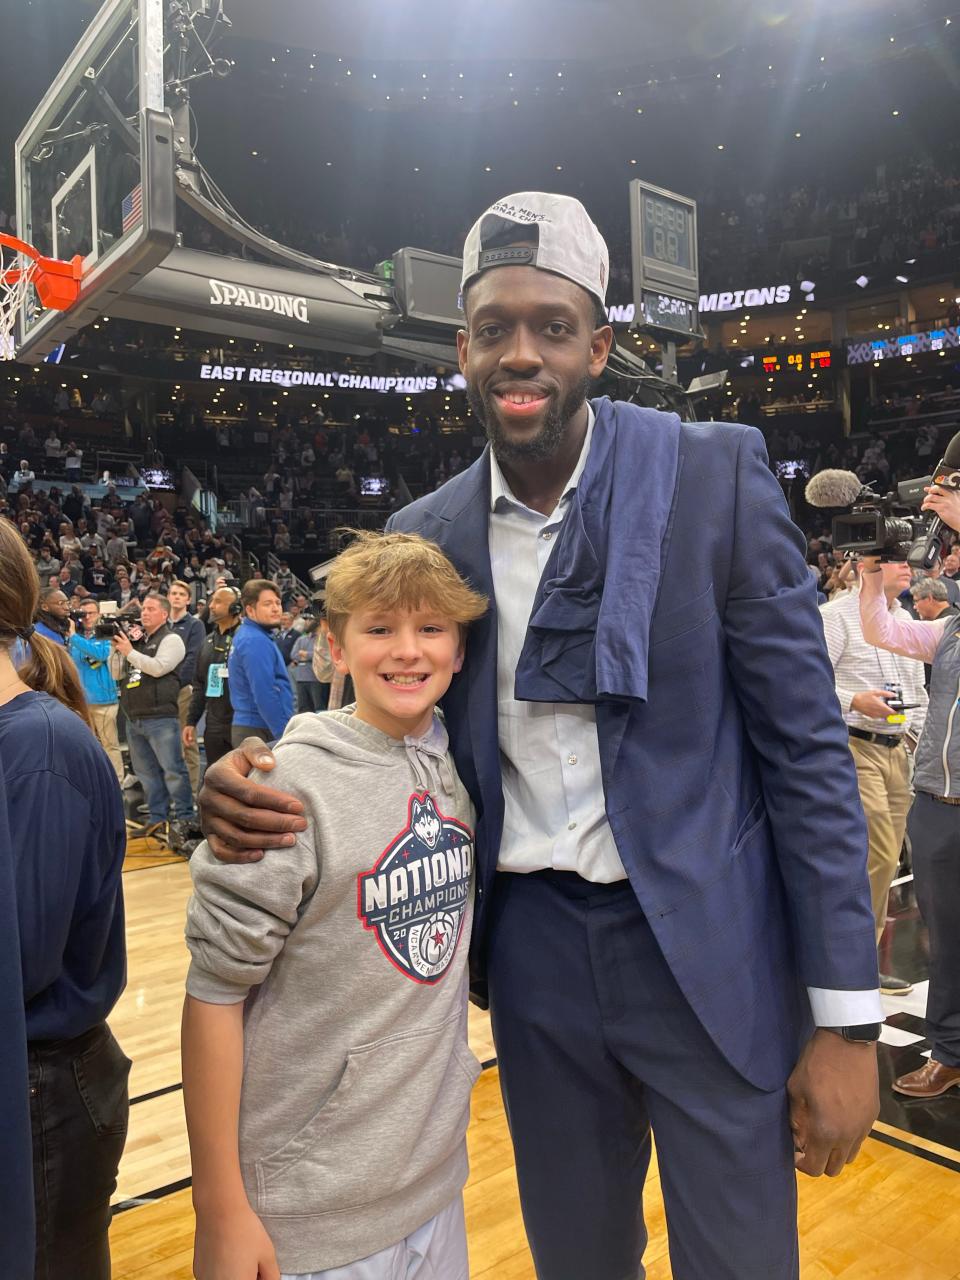 Rylan Ellingwood and UConn director of player development Mamadou Diarra celebrate after the team's win over No. 3 Illinois in the Elite 8 last week.